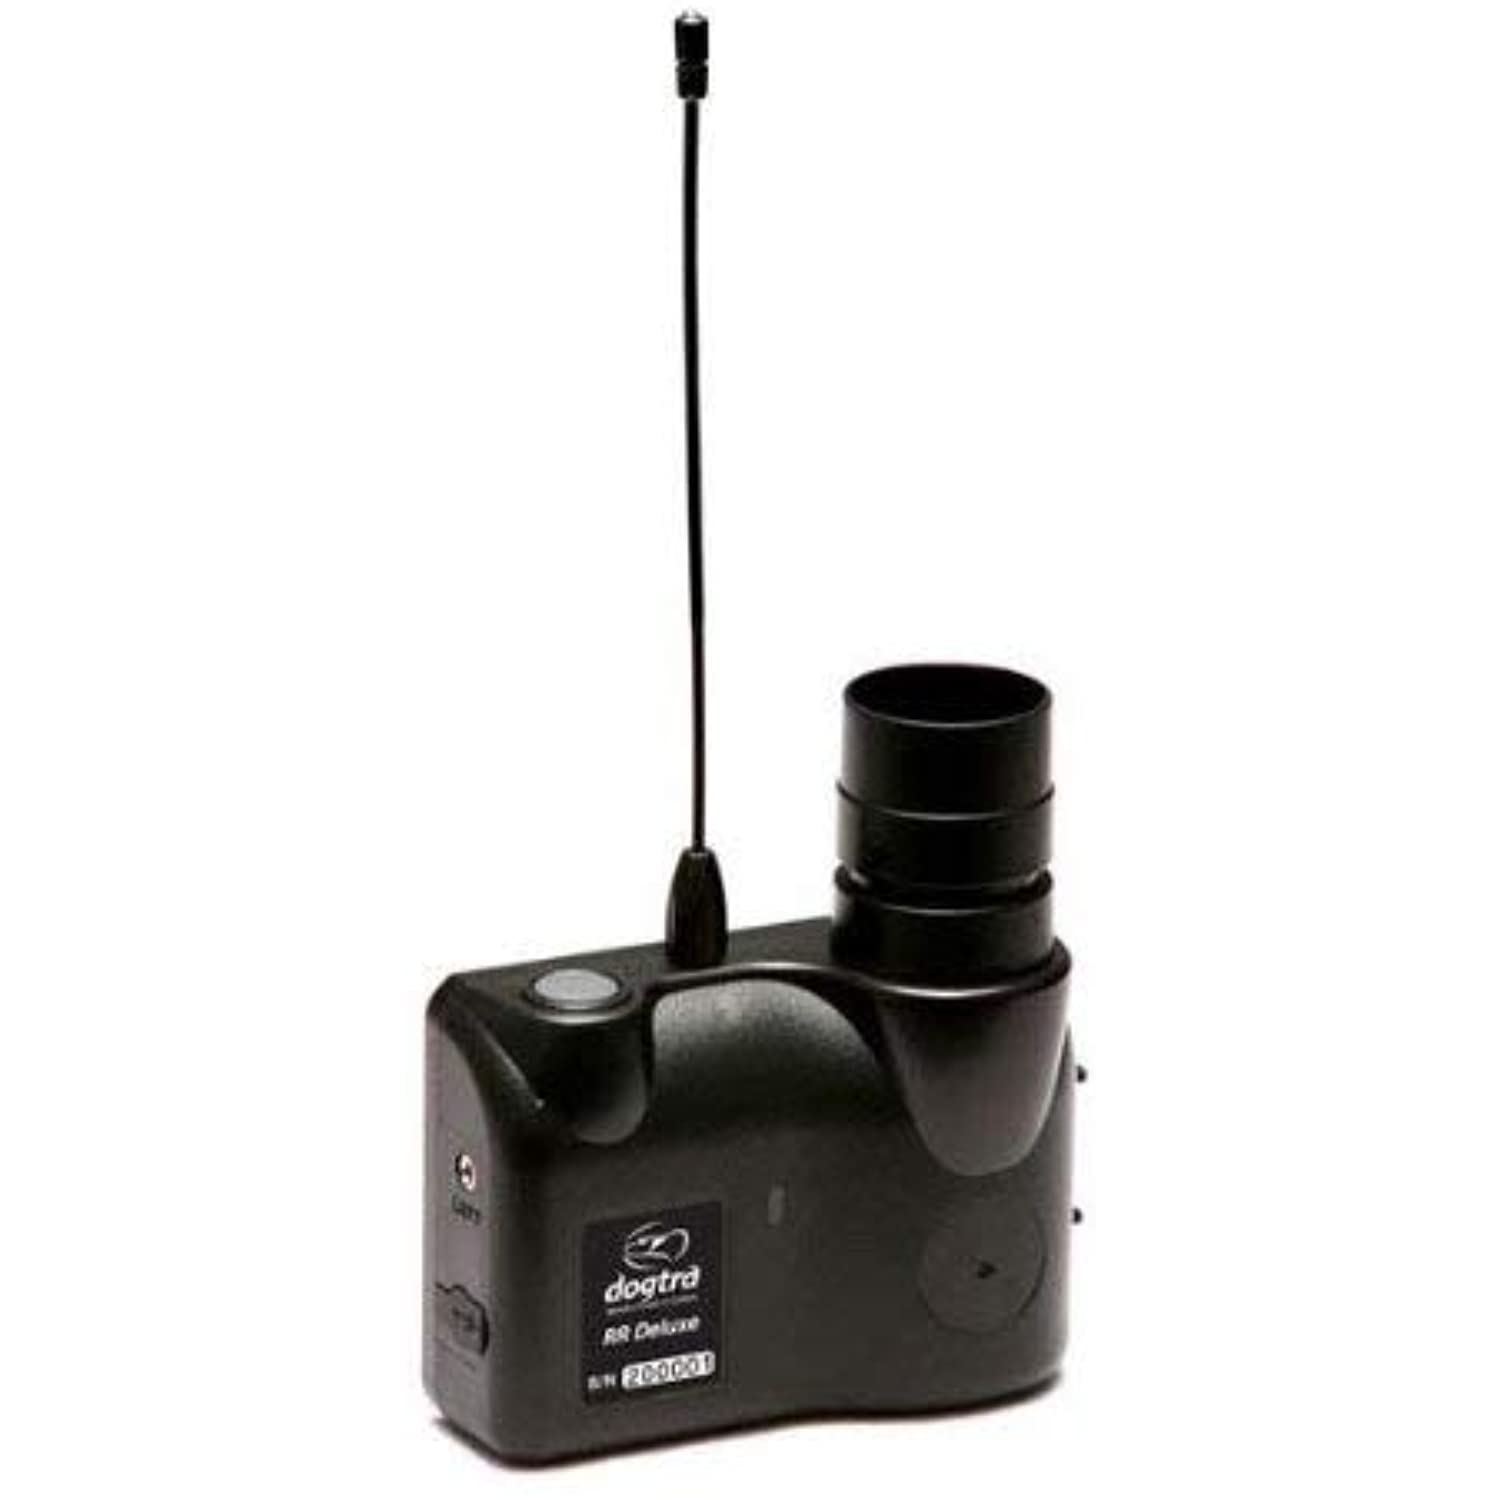 Dogtra RR Deluxe 1-Mile Range Extra Waterproof Receiver with Multiple Sound Modes - image 1 of 2